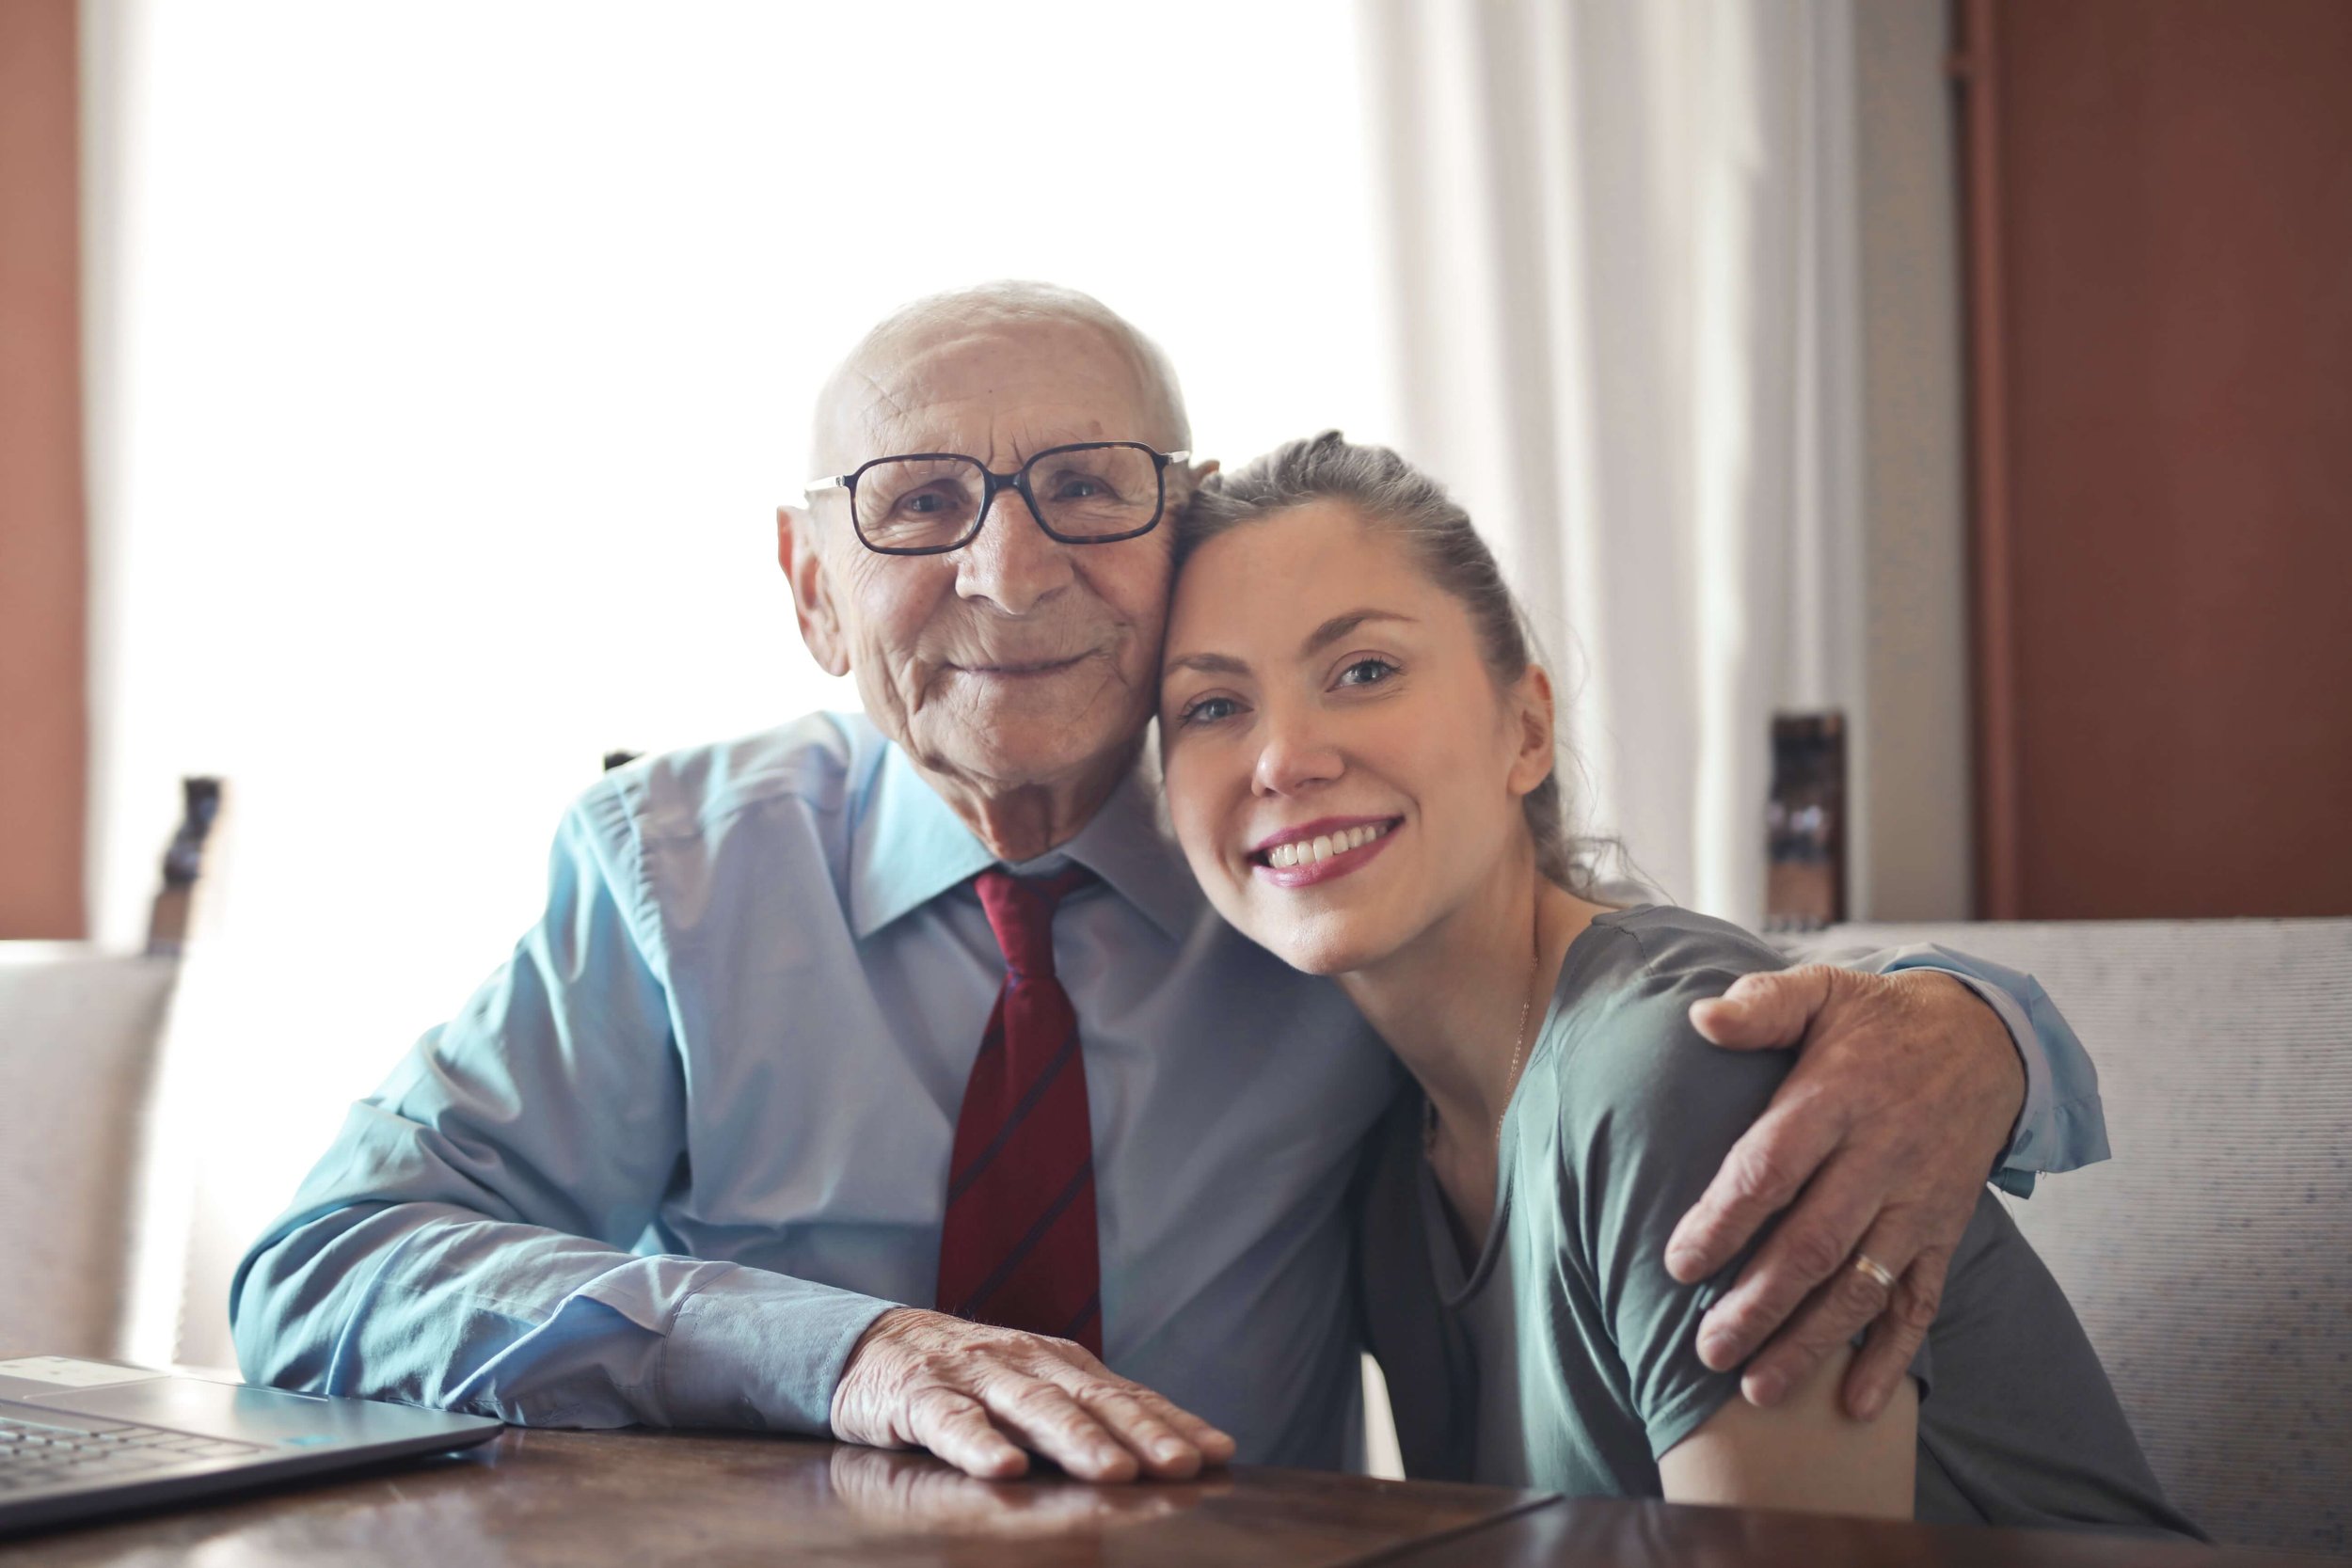 A young woman sits with her grandfather representing the role changes as you transition to adulthood. Connect with a Young Adult Therapist to navigate these changes.